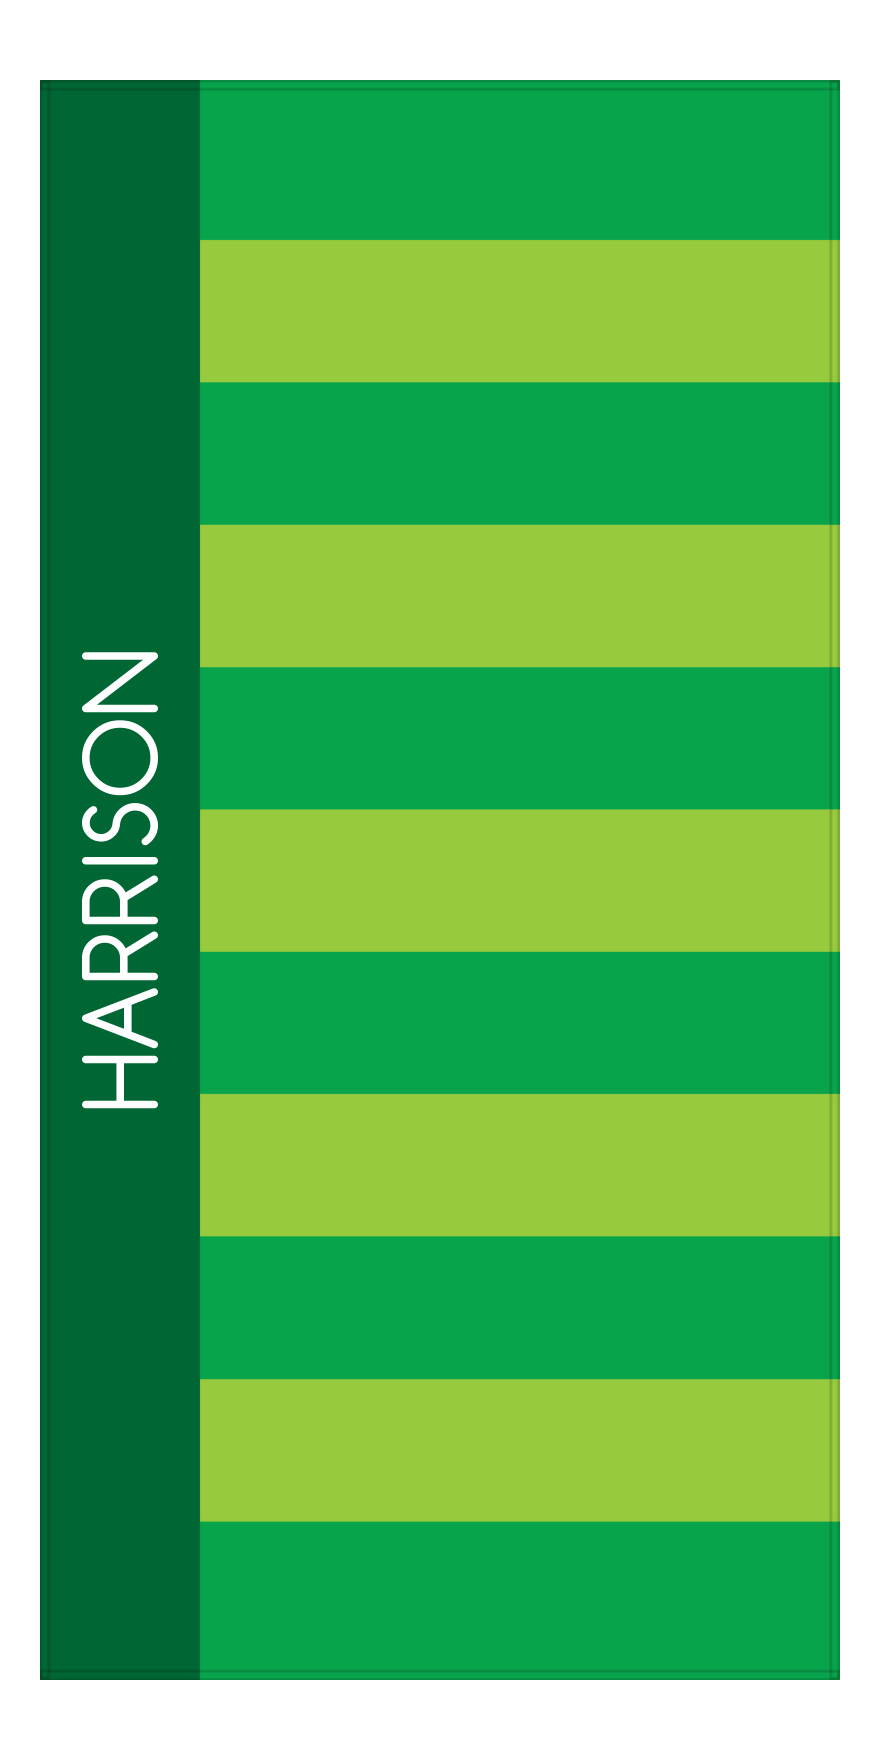 Personalized Rugby Stripes Beach Towel V - Shades of Green - Front View